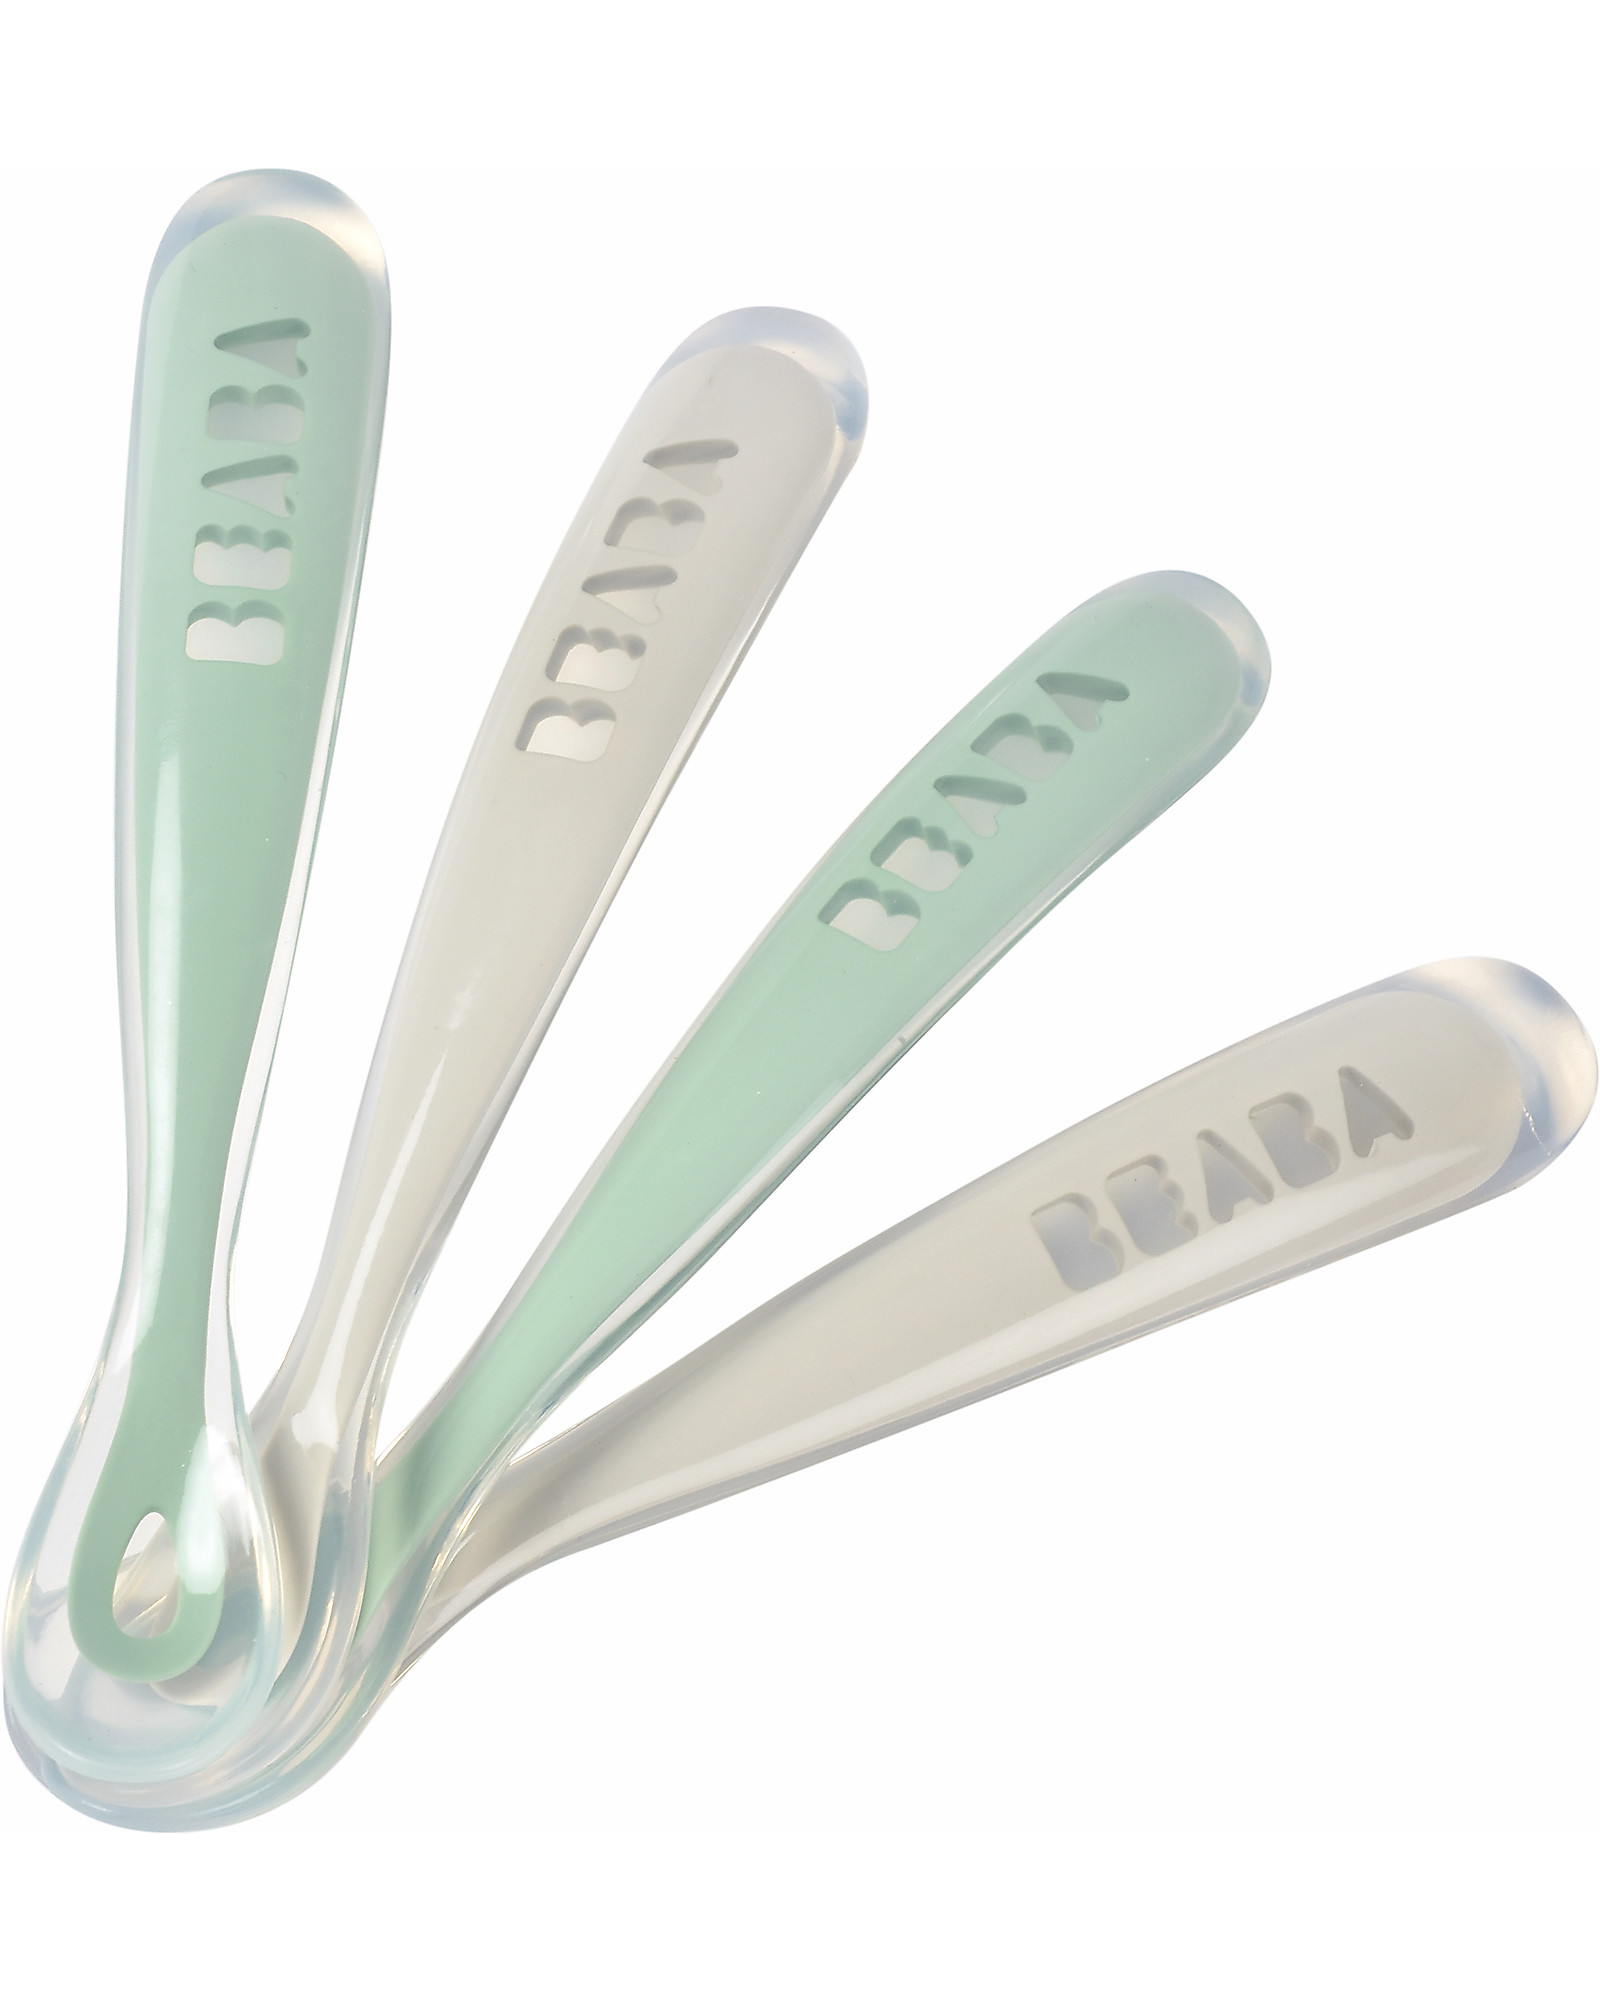 https://data.family-nation.com/imgprodotto/b%C3%A9aba-4-ergonomic-first-age-spoons-set-silicone-grey-and-sage-handy-for-adults-and-delicate-for-children-cutlery_445461_zoom.jpg